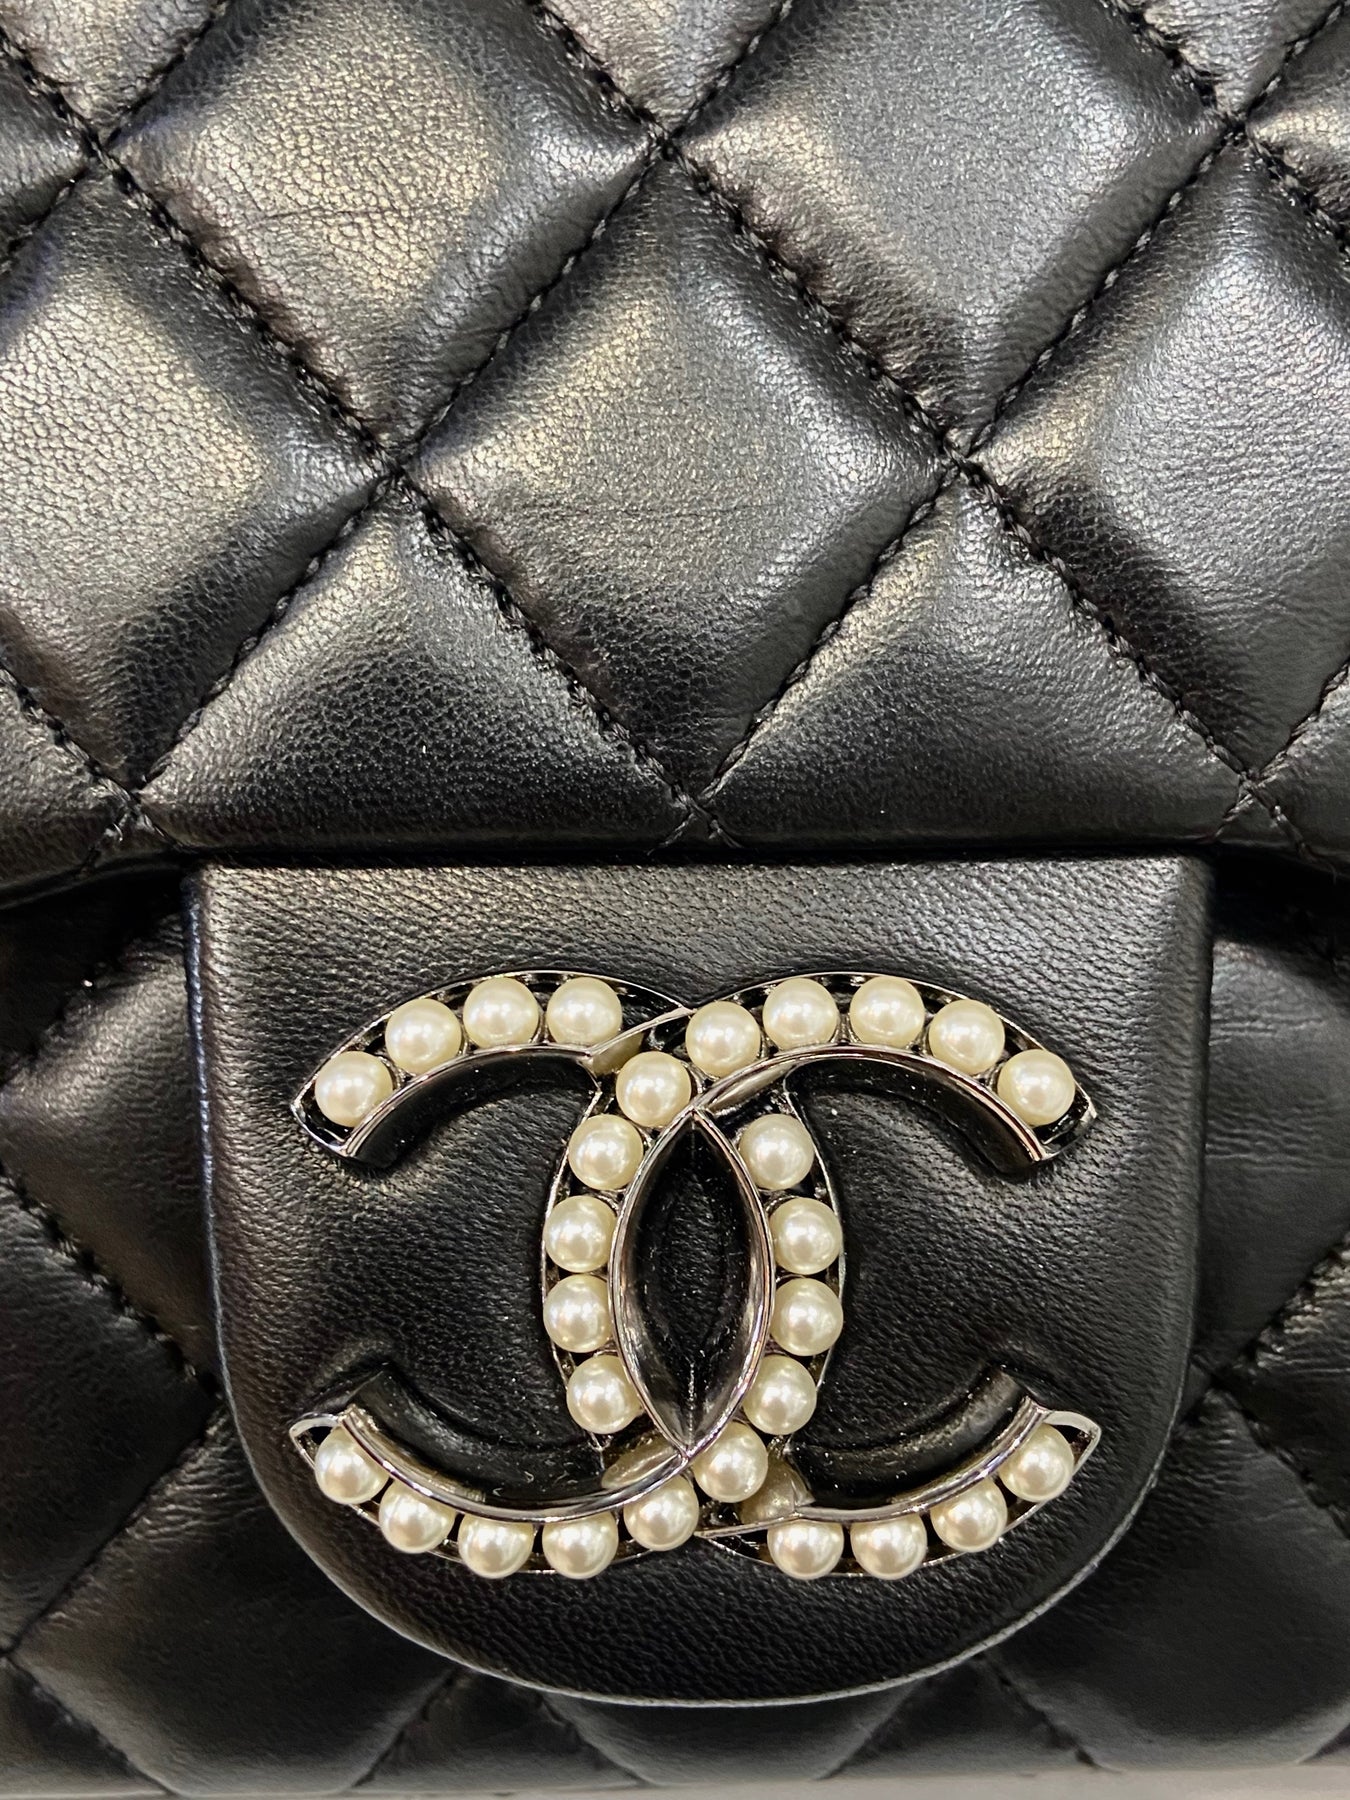 CHANEL CC WESTMINSTER PEARL FLAP LAMBSKIN BAG